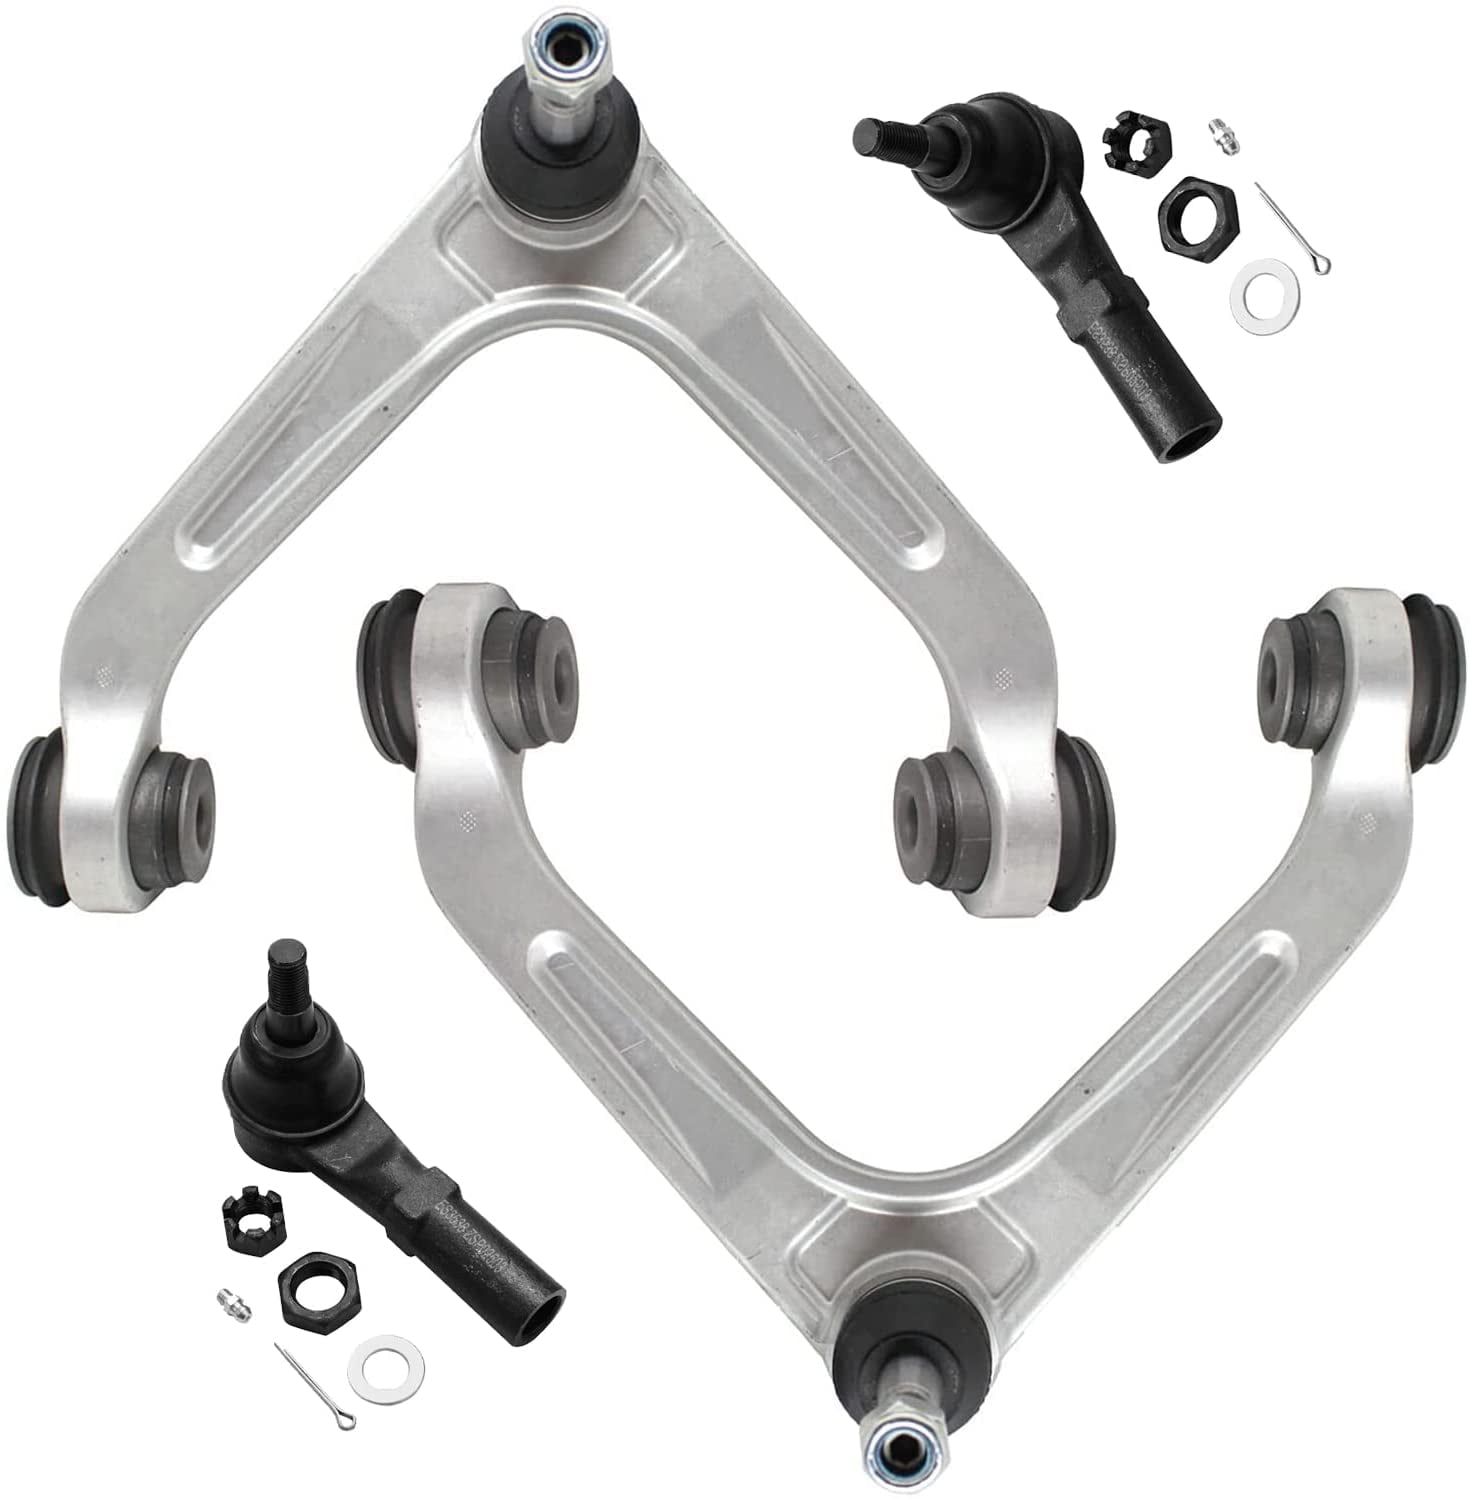 New 4pc Front Upper and Lower Ball Joint Set for Dodge Ram 2500 3500 2WD